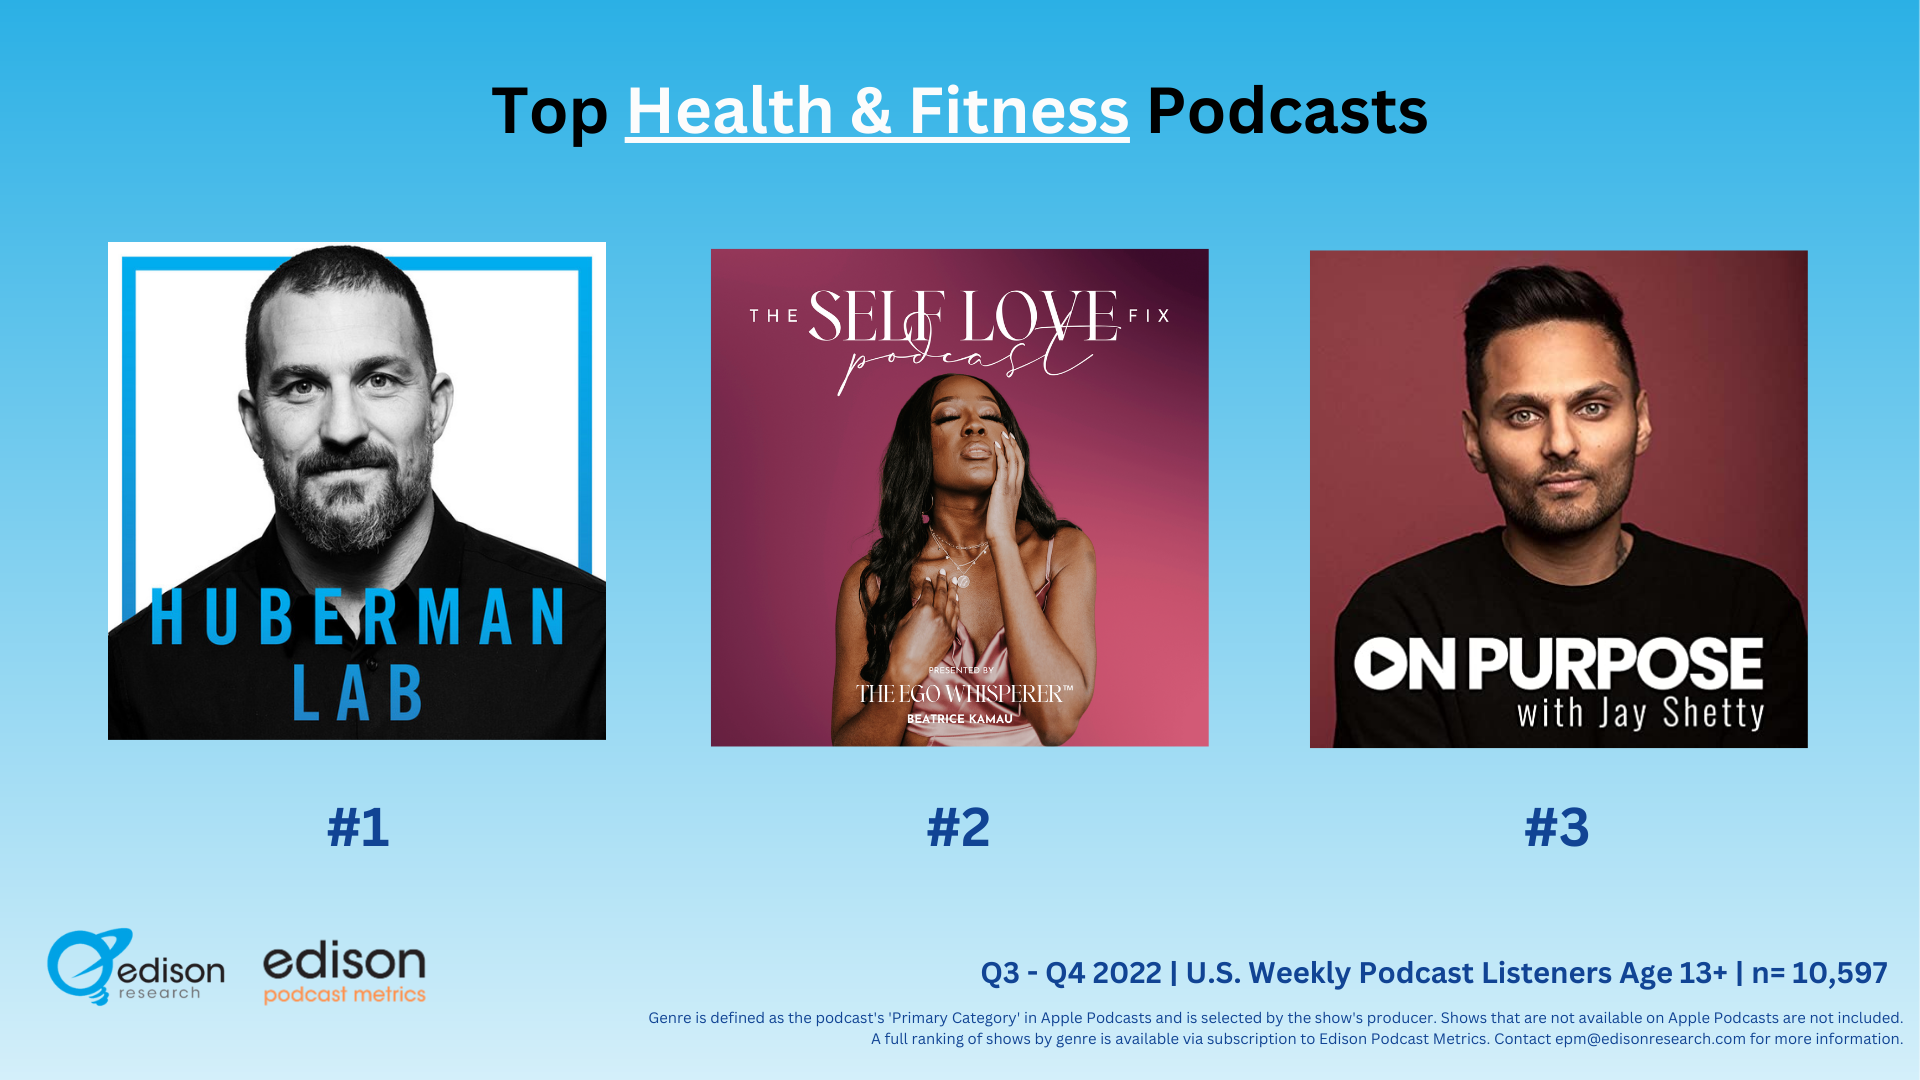 klinke Fortrolig bold Top Podcasts in Arts, Health & Fitness, Kids & Family, and Leisure, by  reach - Edison Research